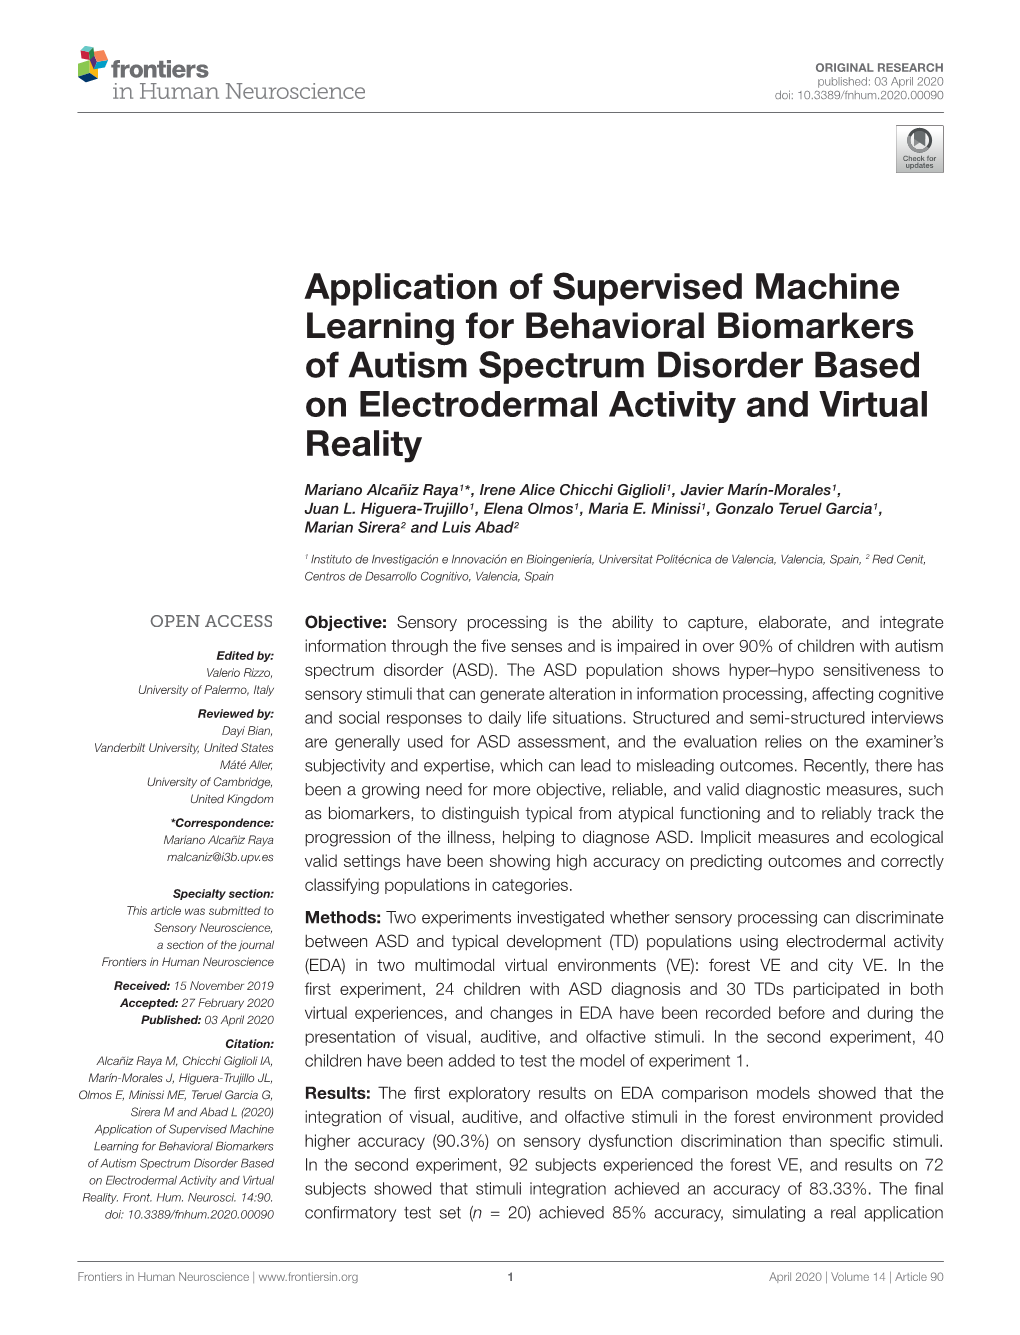 Application of Supervised Machine Learning for Behavioral Biomarkers of Autism Spectrum Disorder Based on Electrodermal Activity and Virtual Reality